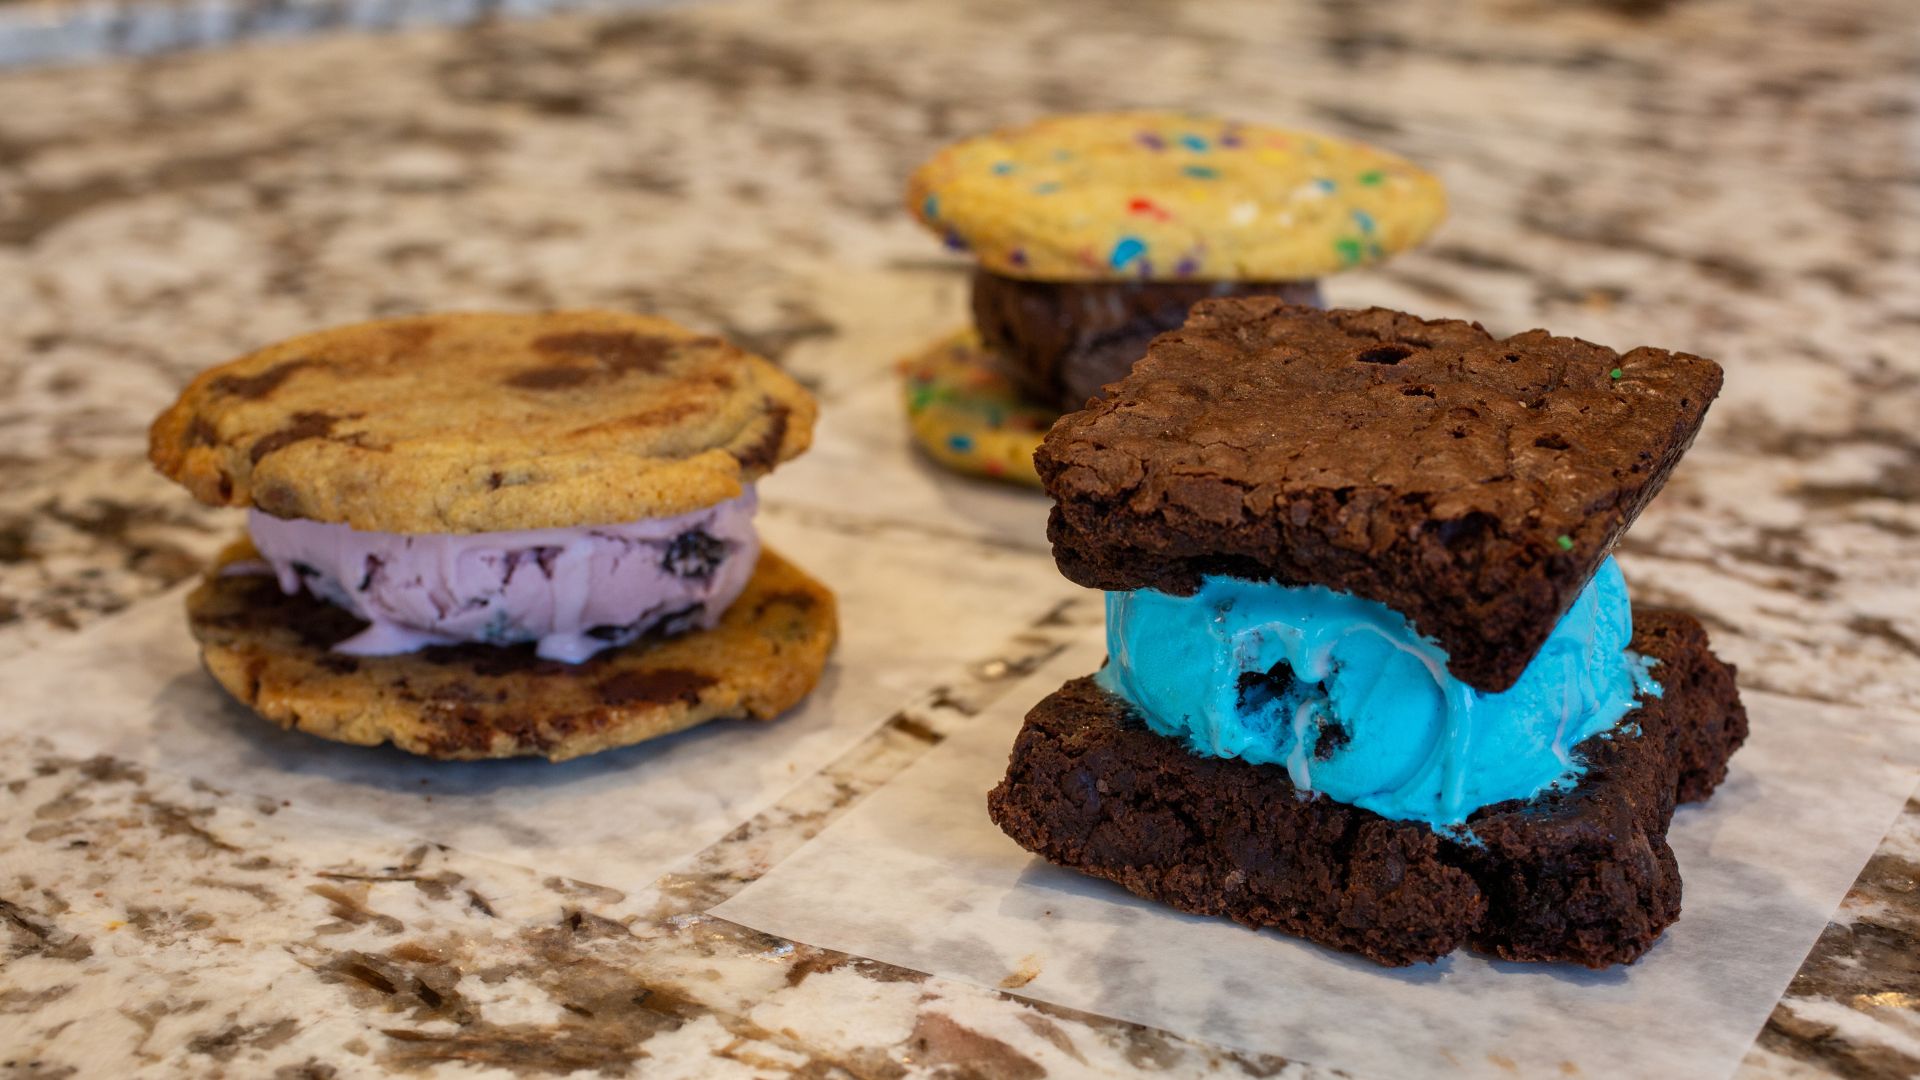 The homemade ice cream sandwiches at Serendipity will satisfy your sweet tooth in St. Louis.